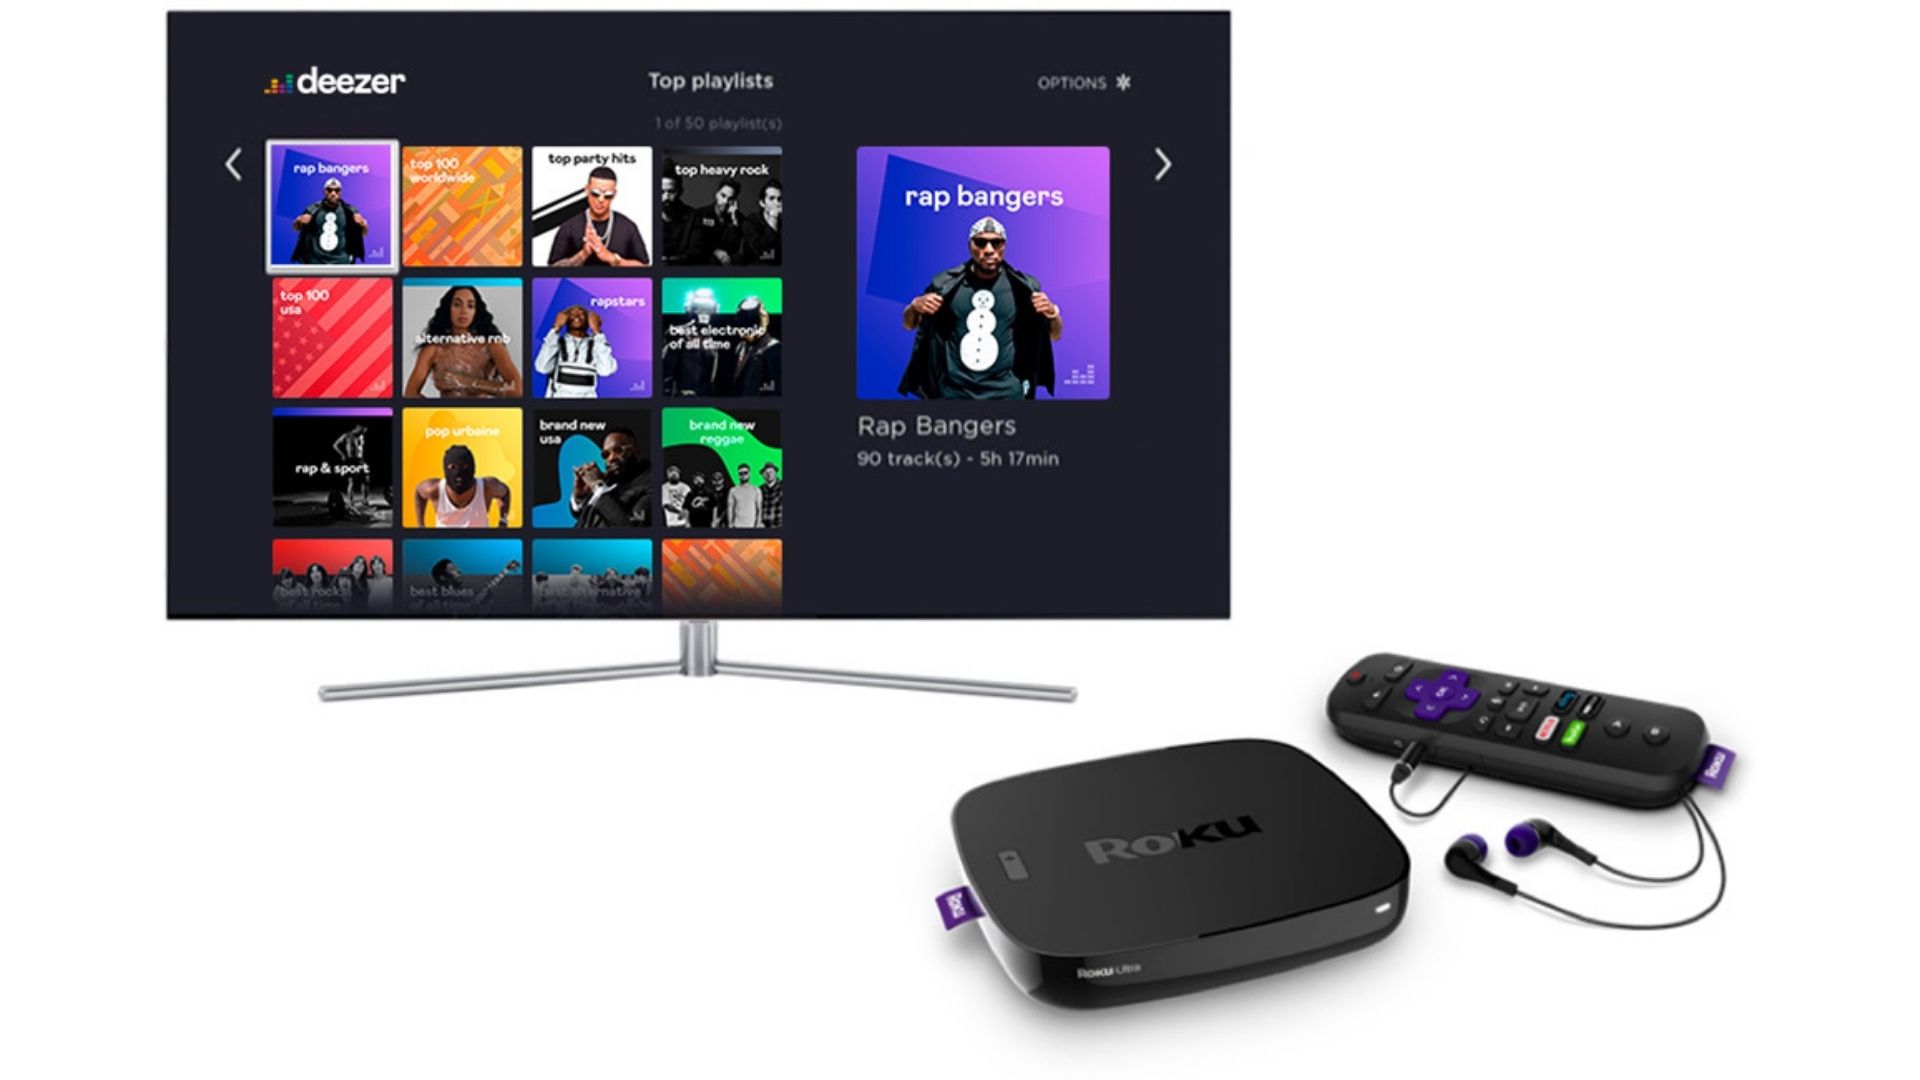 OTT platforms witness 35% growth in paid users, subscription revenue up by 42%, Roku’s streaming plans aim to fill the gaps Netflix can’t, and other top news